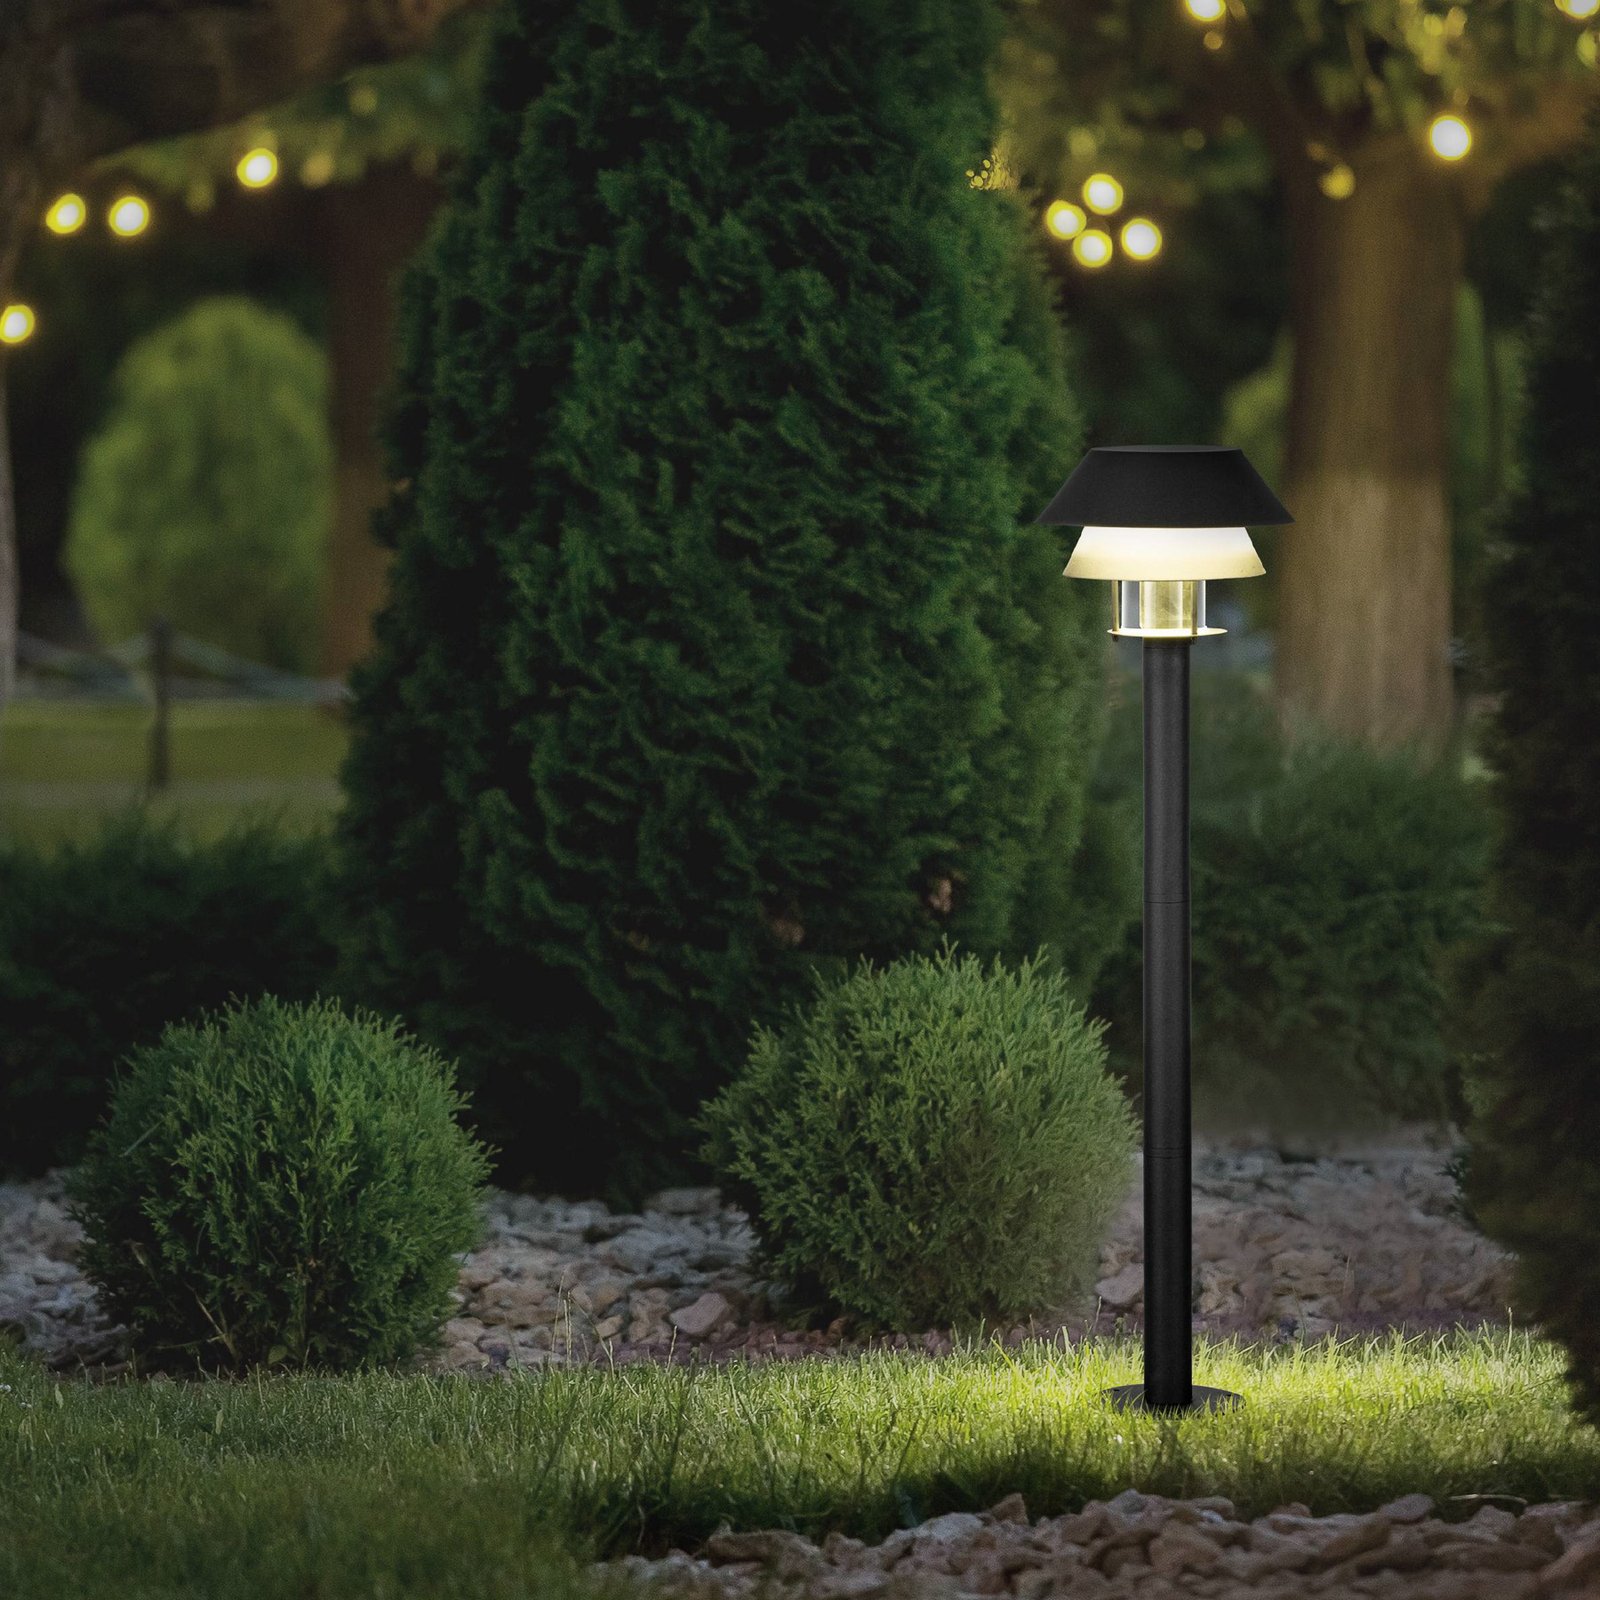 Chiappera path light with a double lampshade